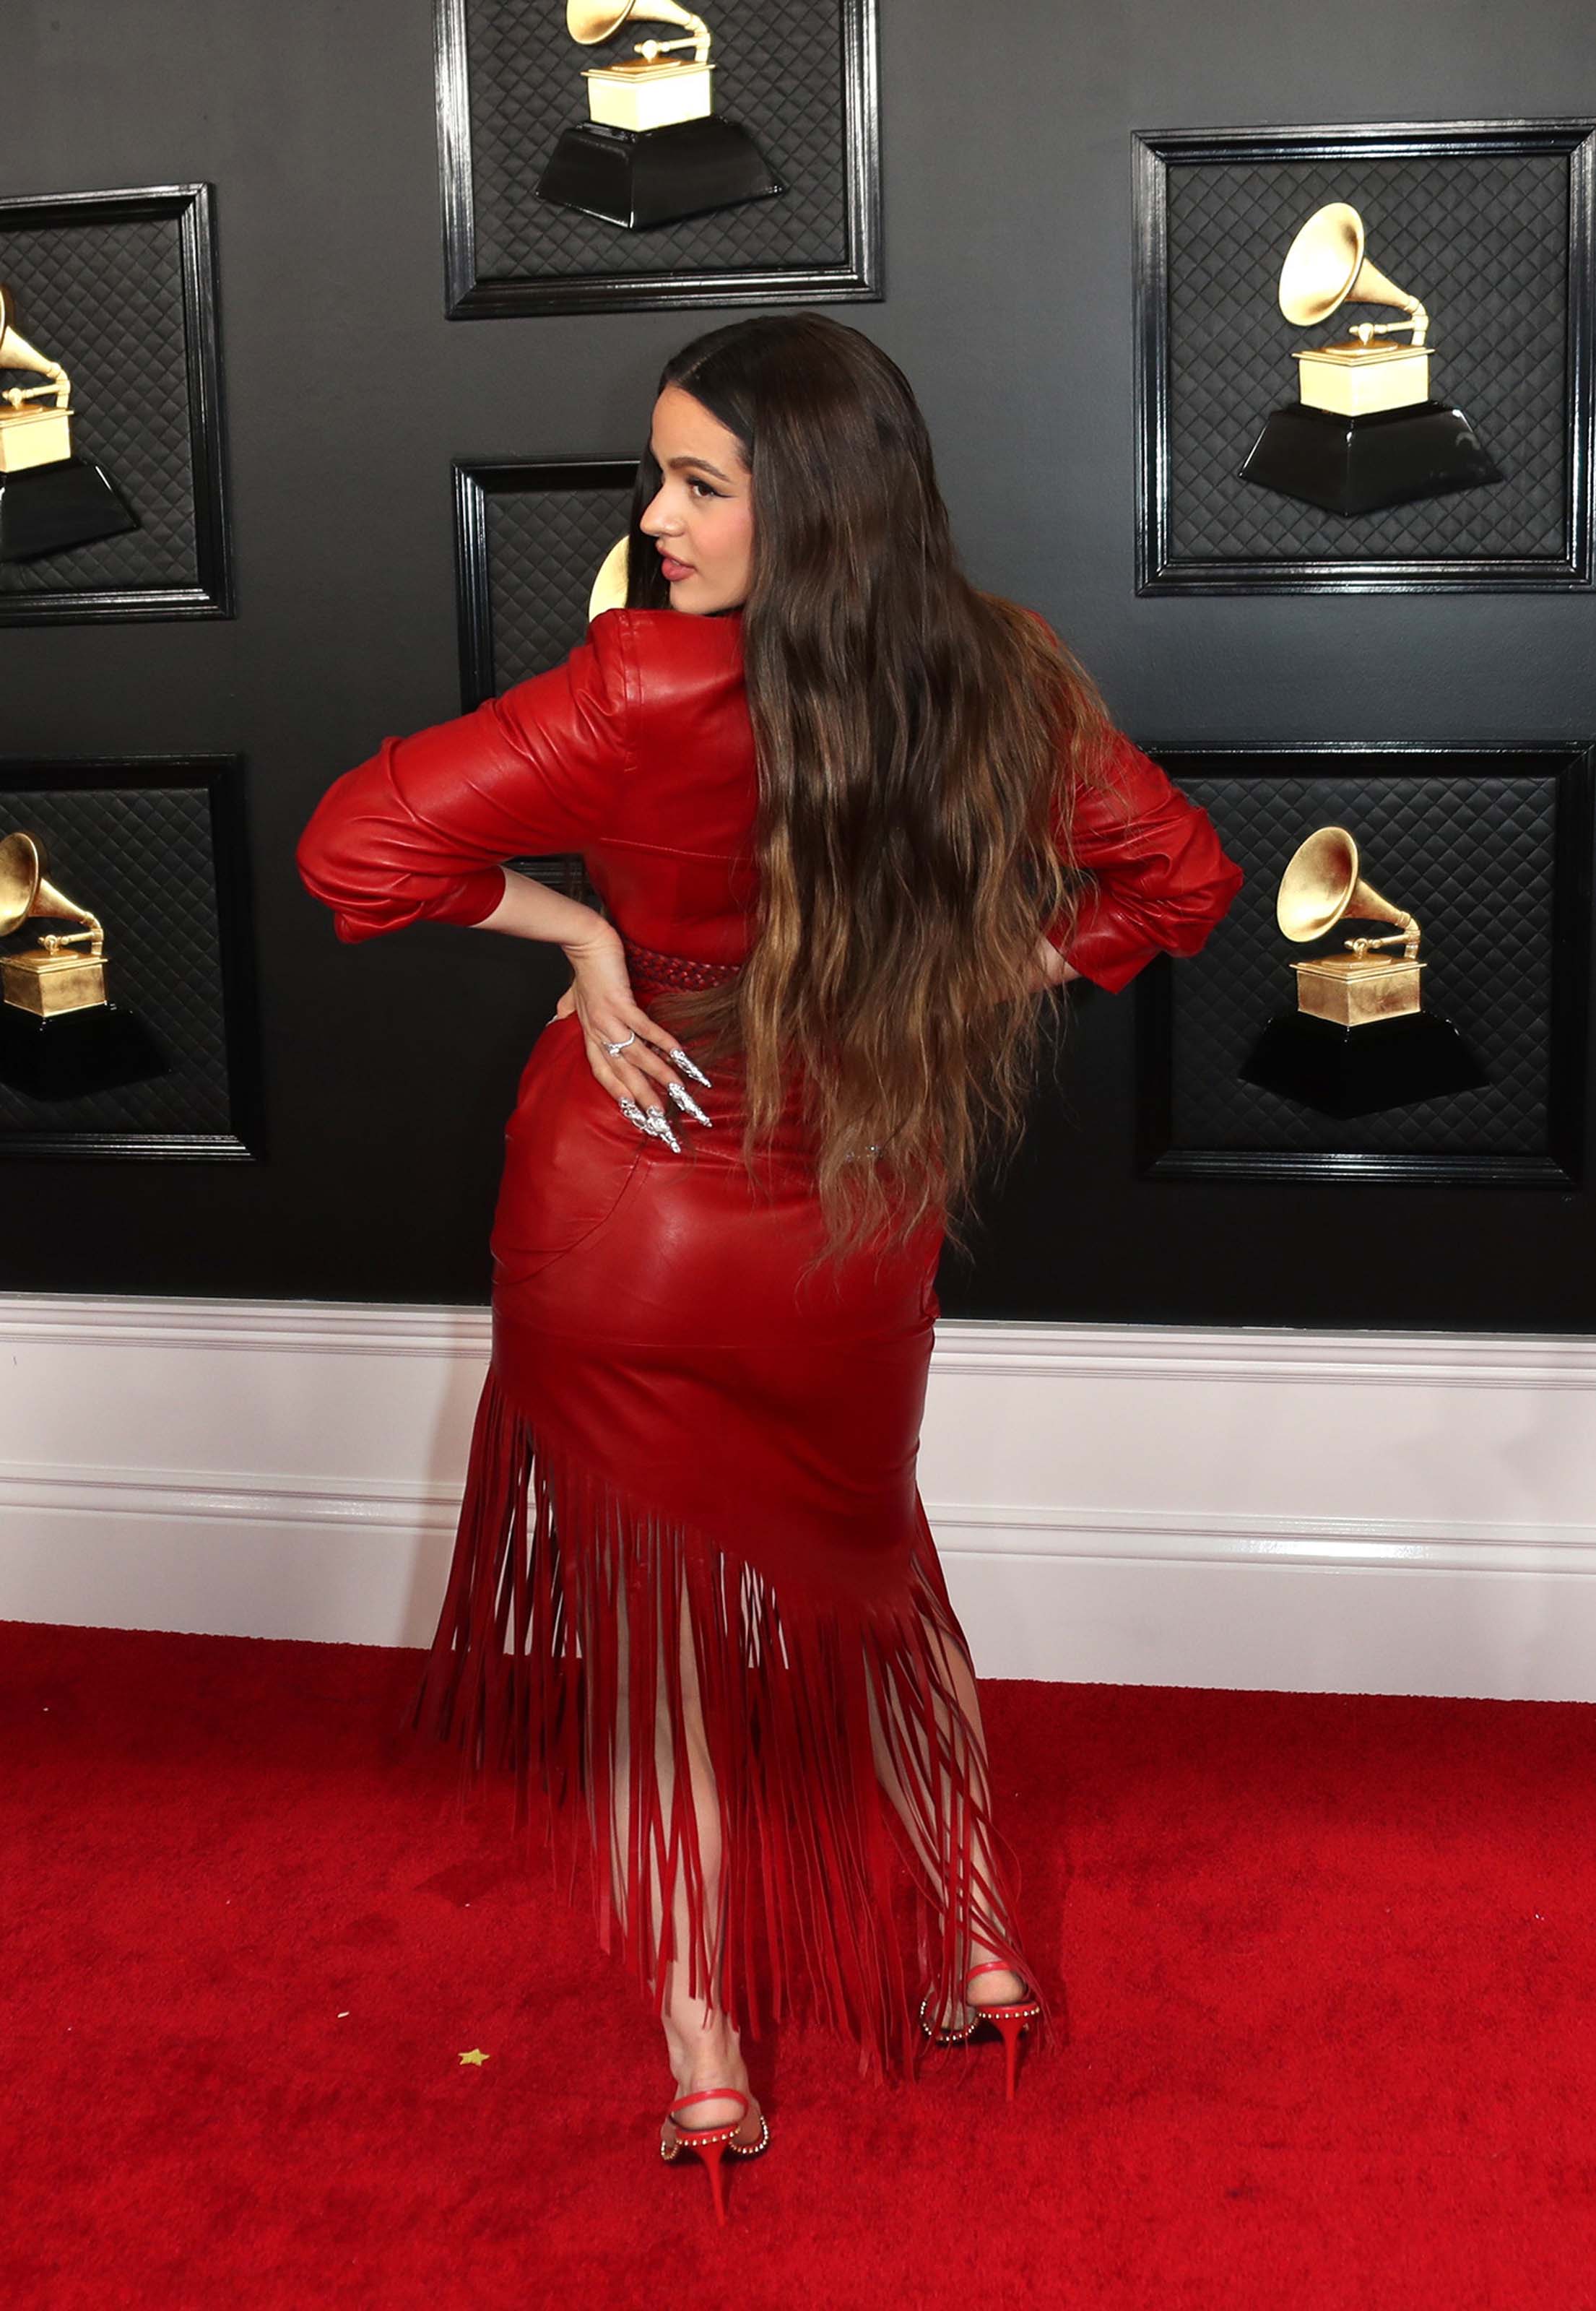 Rosalia attends 62nd Annual GRAMMY Awards at Staples Center in Los Angeles, CA